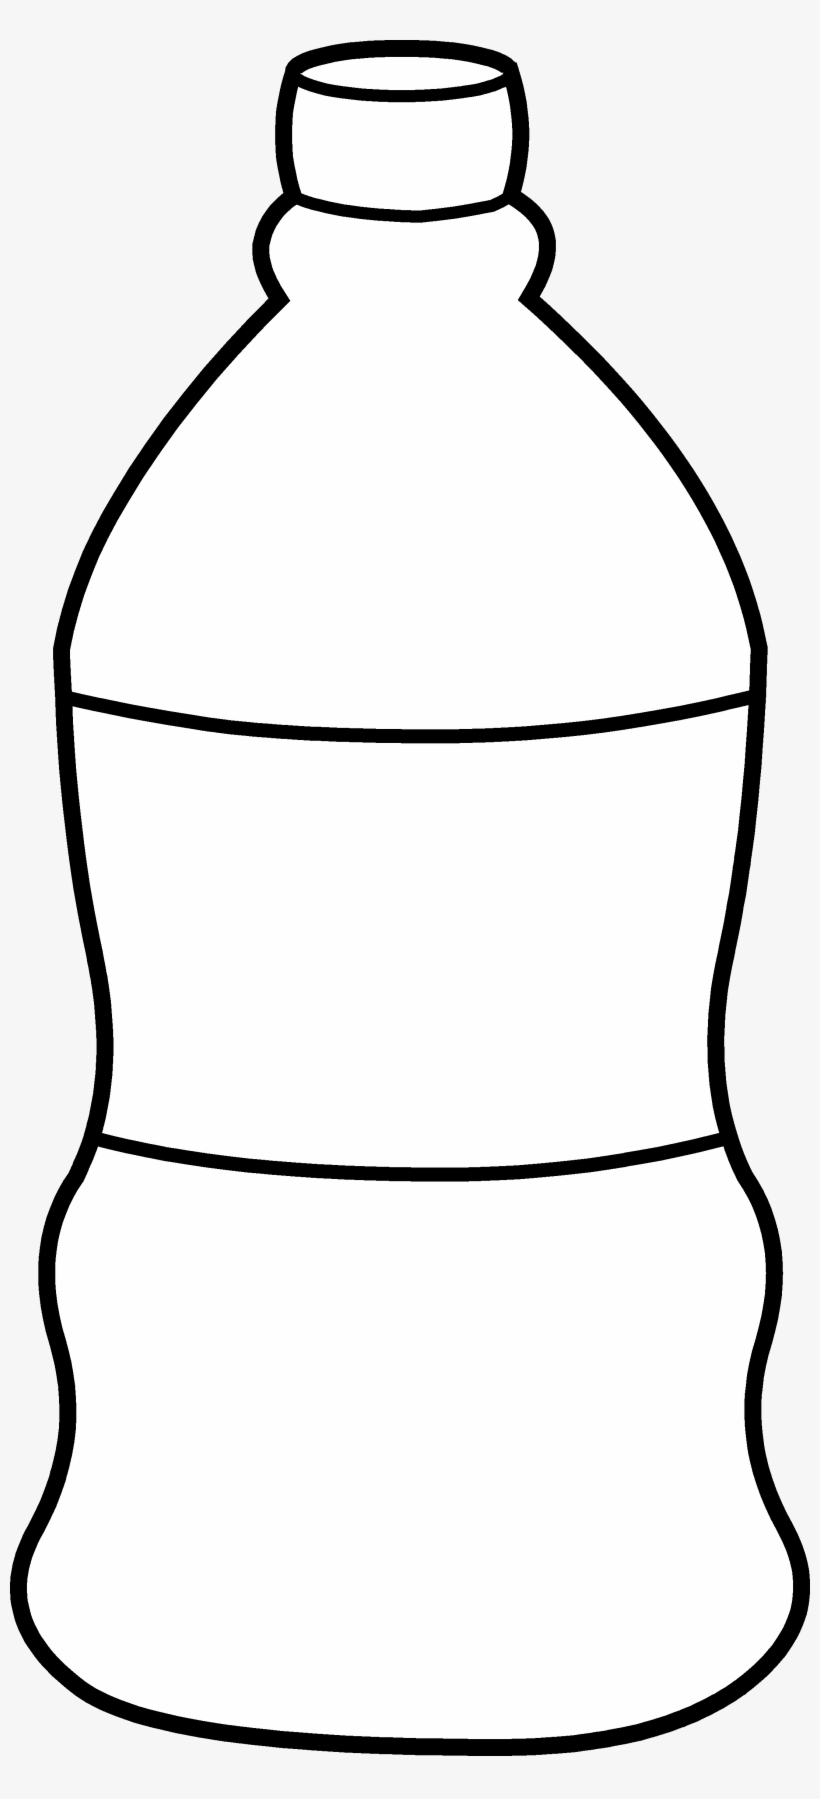 Water Black And White Measuring Cup Of Water Clipart - Water Bottle To Colour, transparent png #1231879